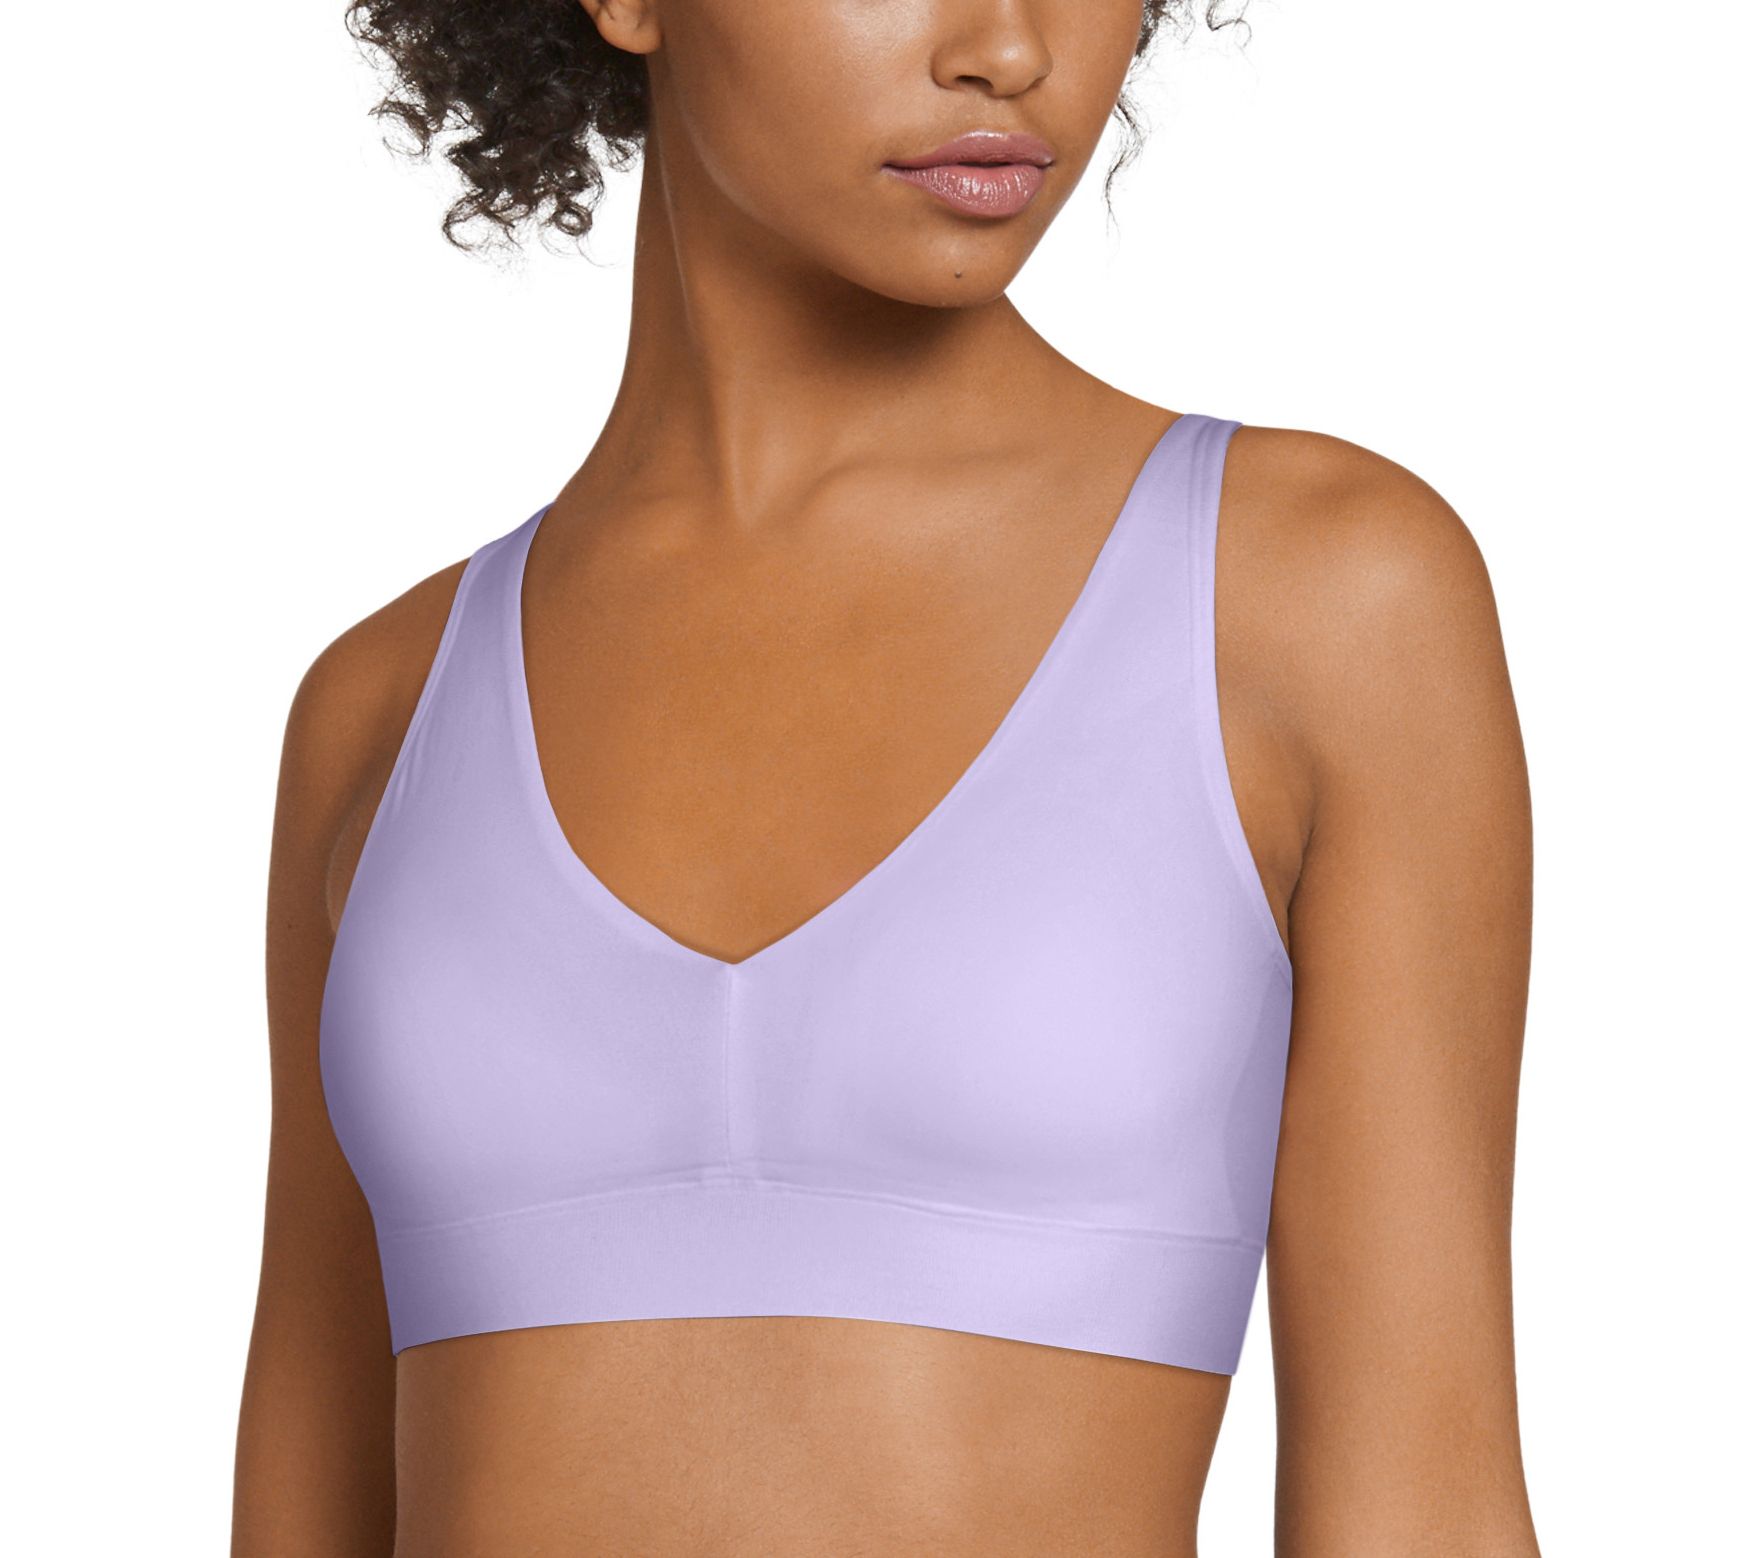 Smooth & Shine Molded Cup Seamfree Bralette 21009